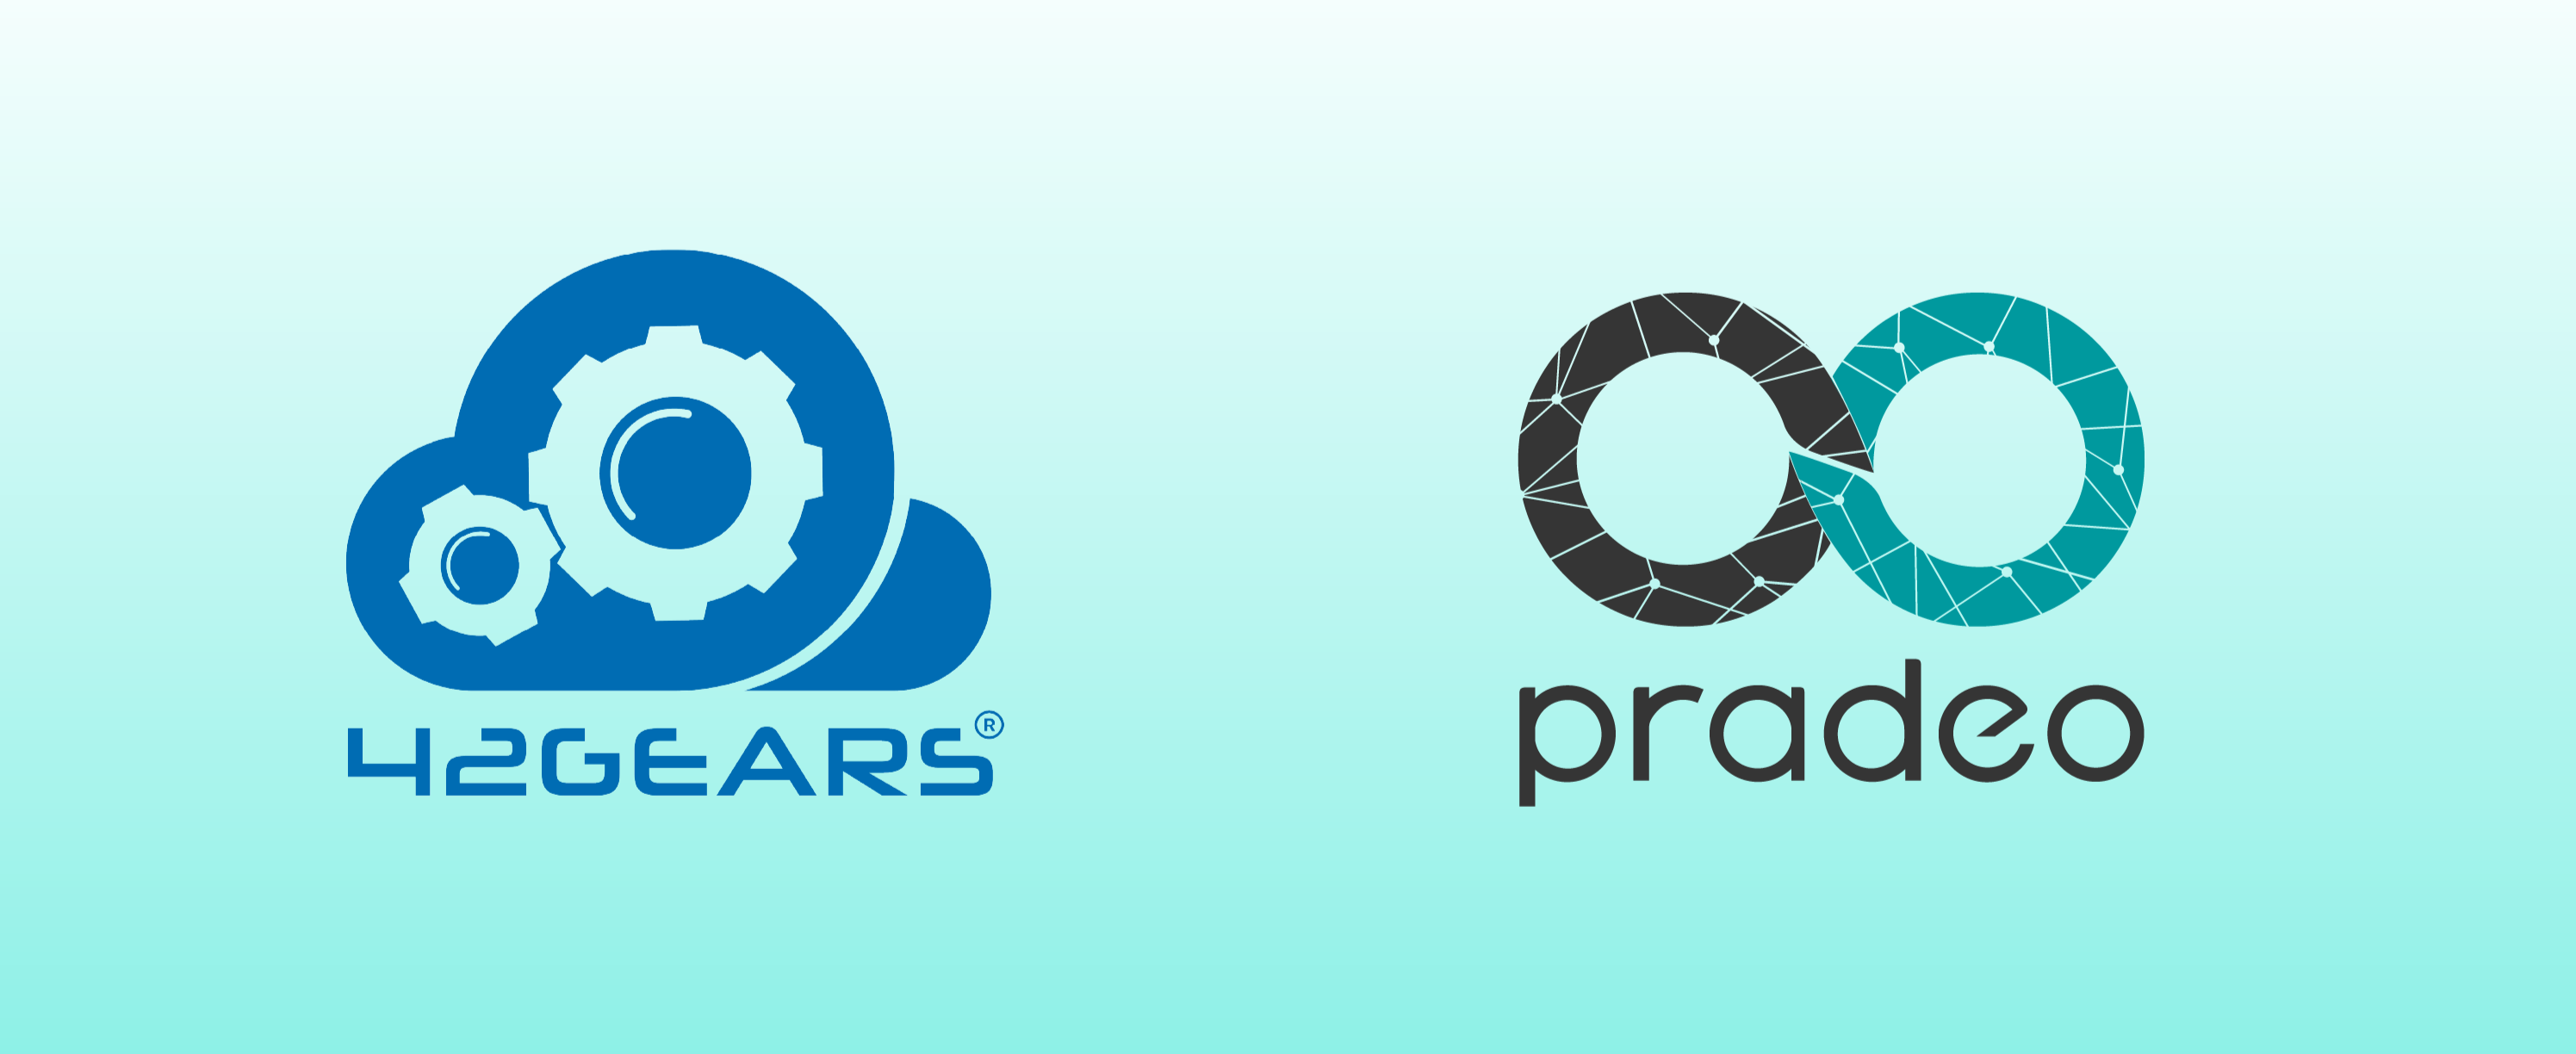 42Gears and Pradeo : Partner for Advanced Mobile Security